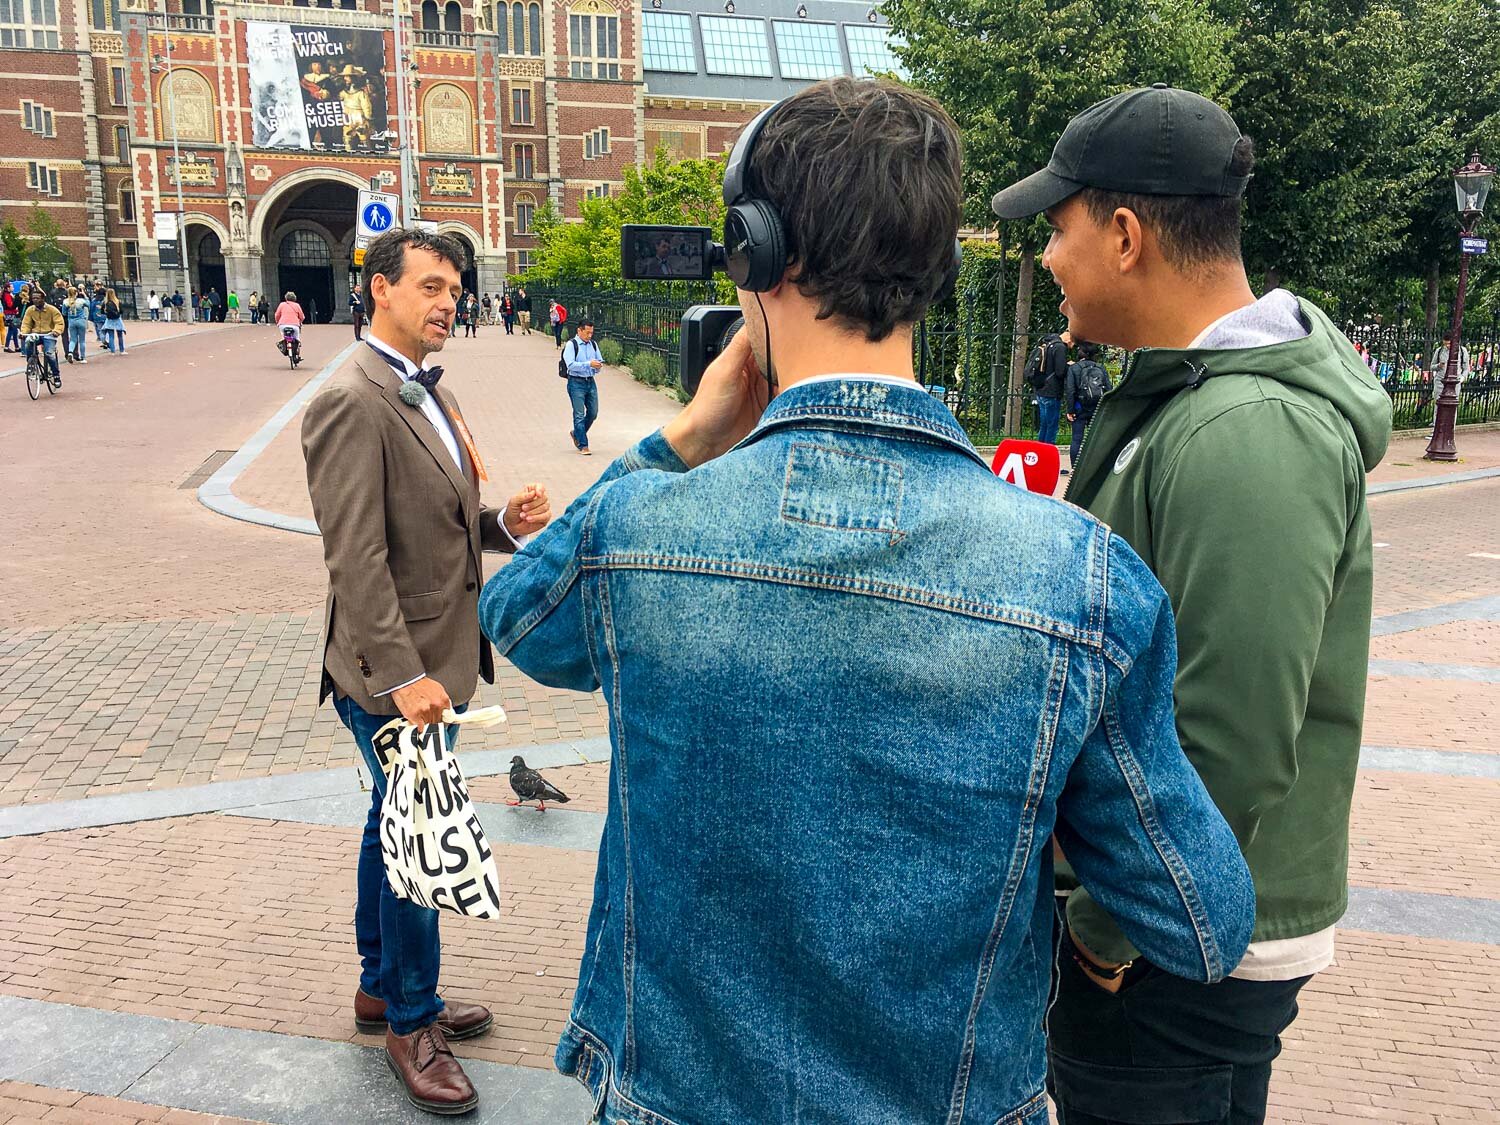 Interview AT5 outside Rijksmuseum